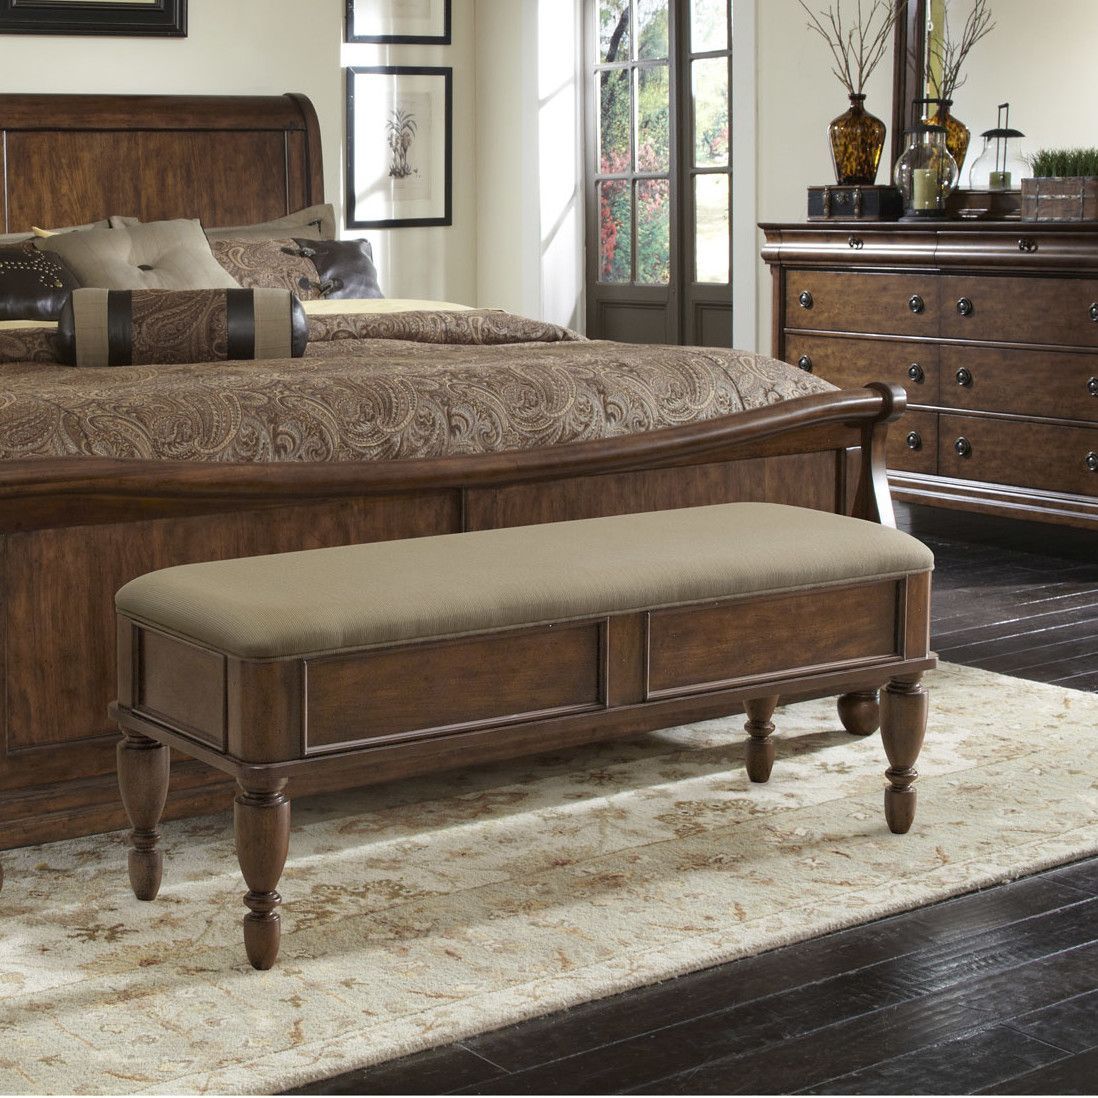 How To Incorporate A Bedroom Upholstered Bench In Your Decor